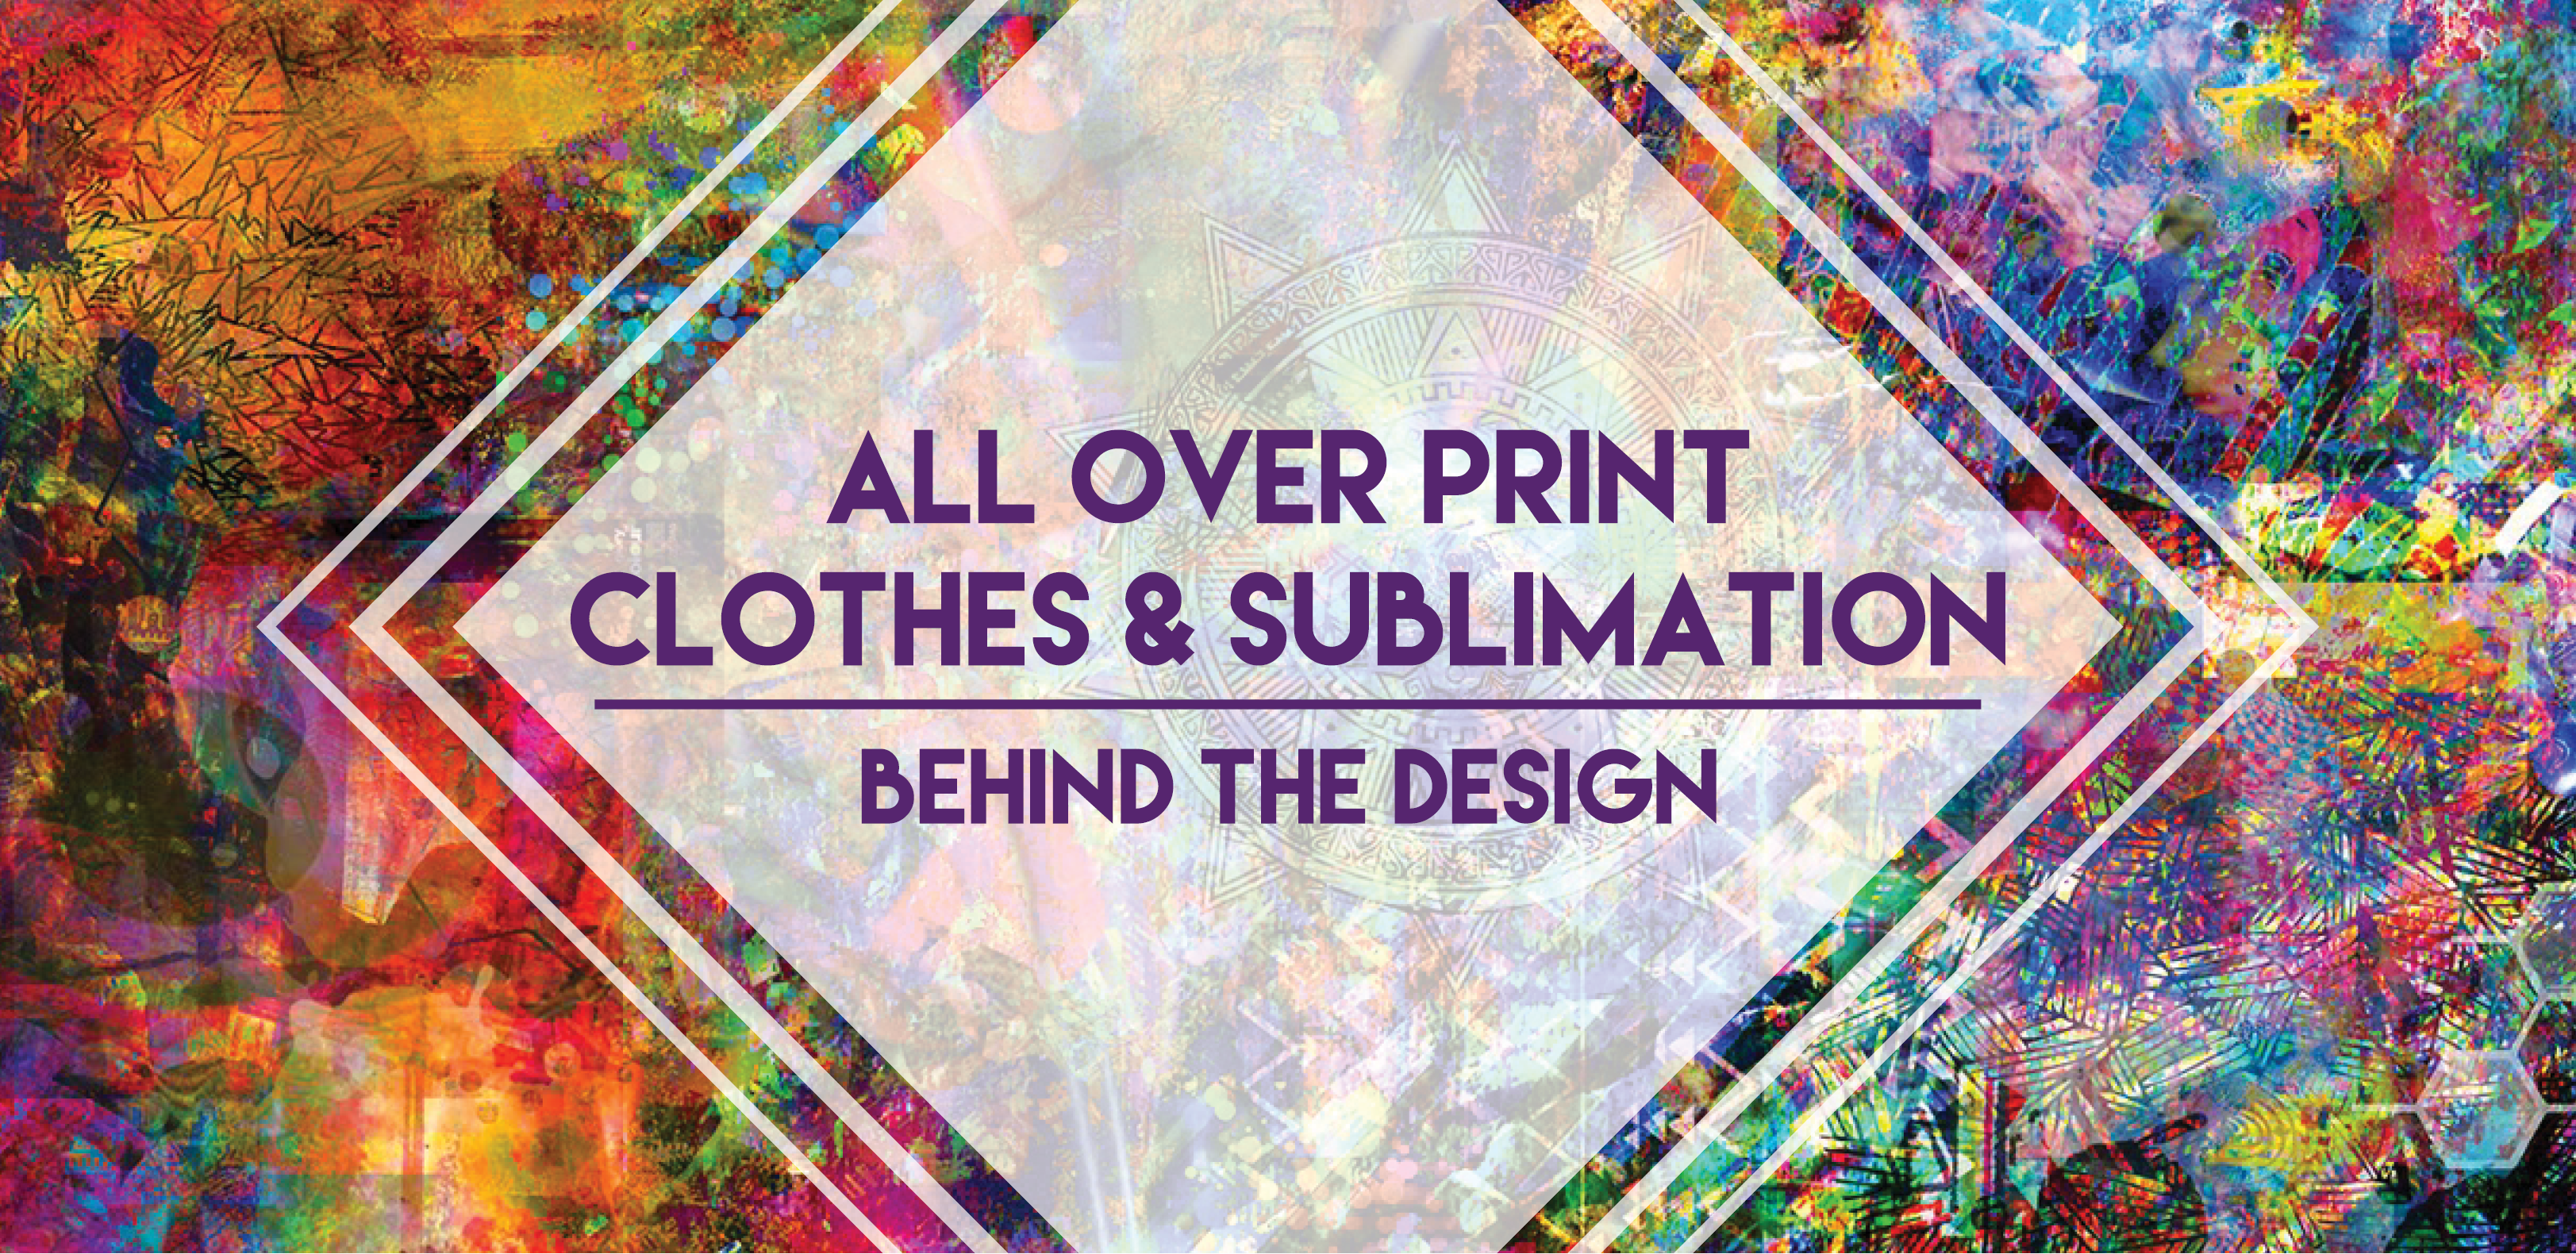 onblast-edm-blog/all-over-print-clothes-sublimation-behind-the-design